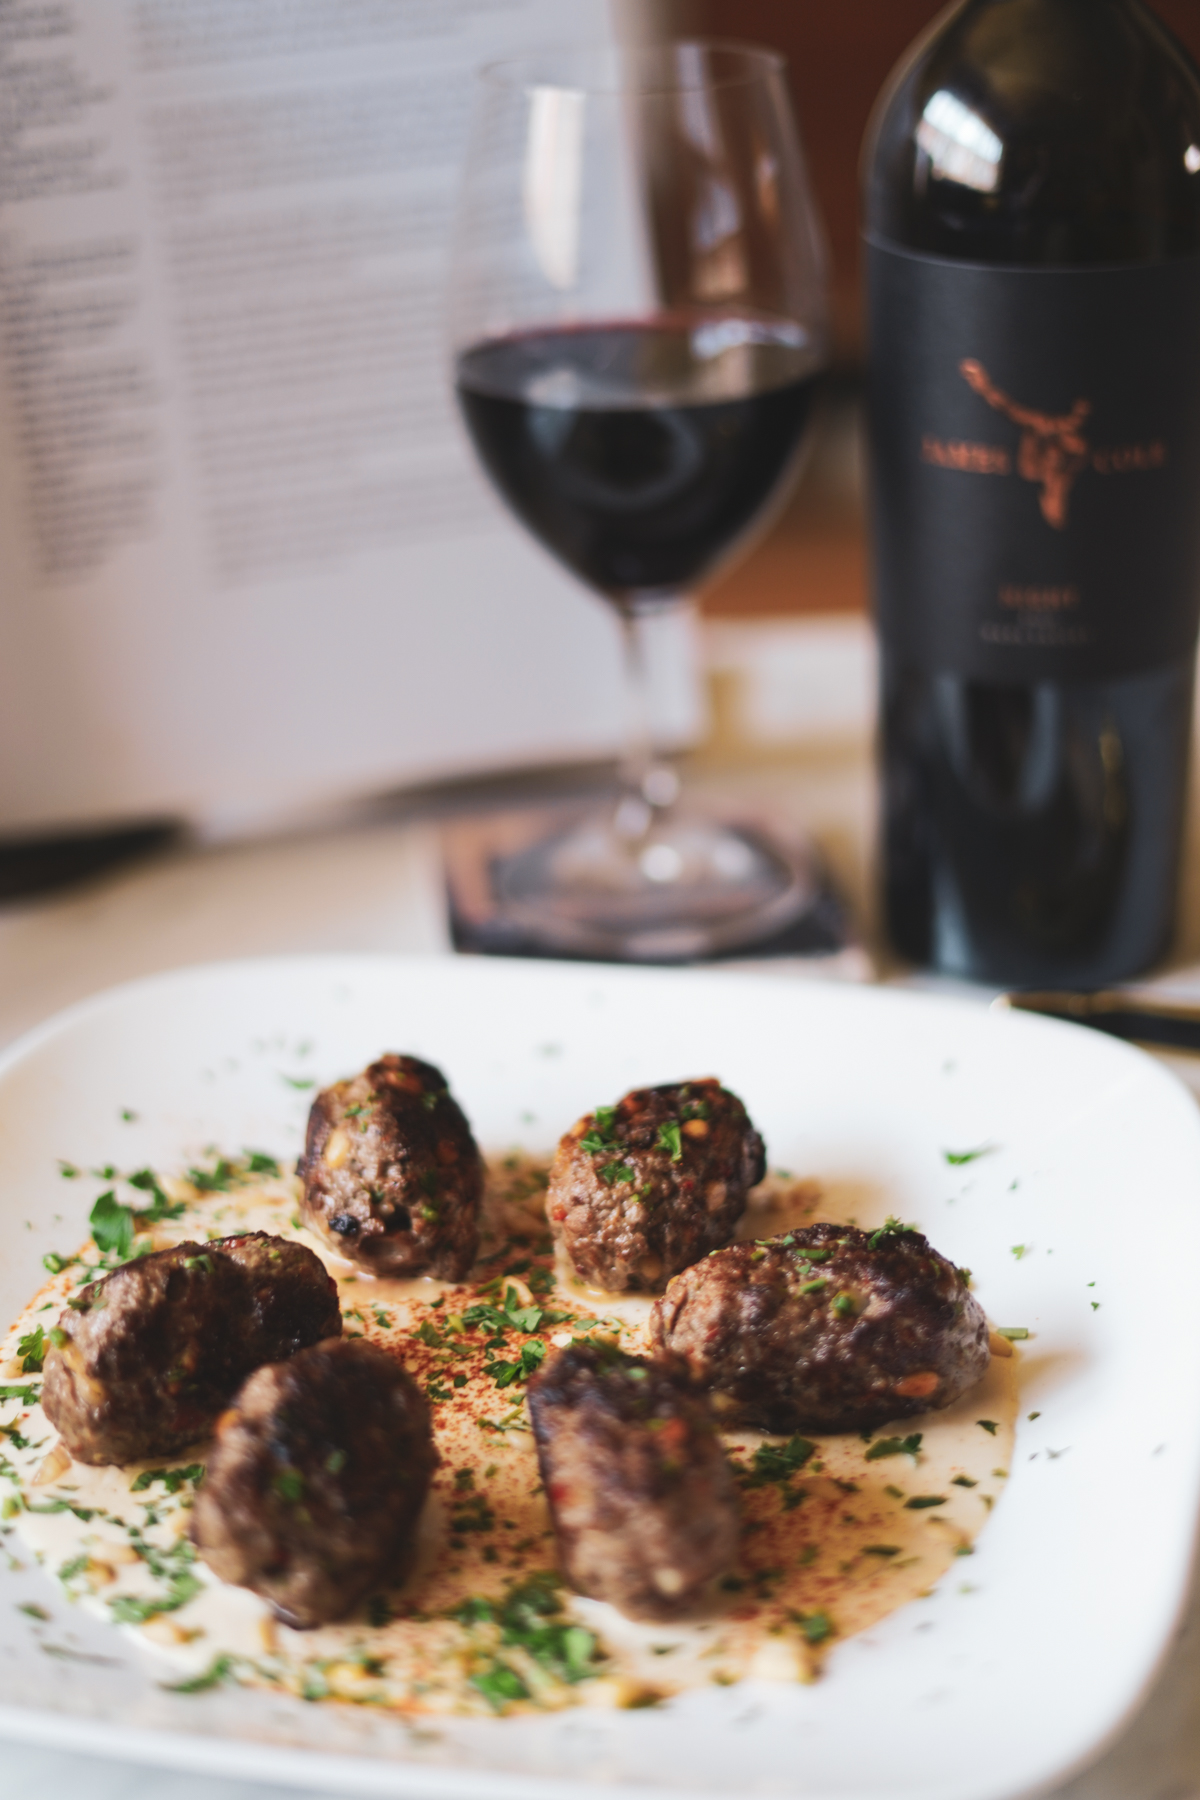 Lamb kofta served on a white plate with a bottle and glass of 2020 Night Red Wine in the background.